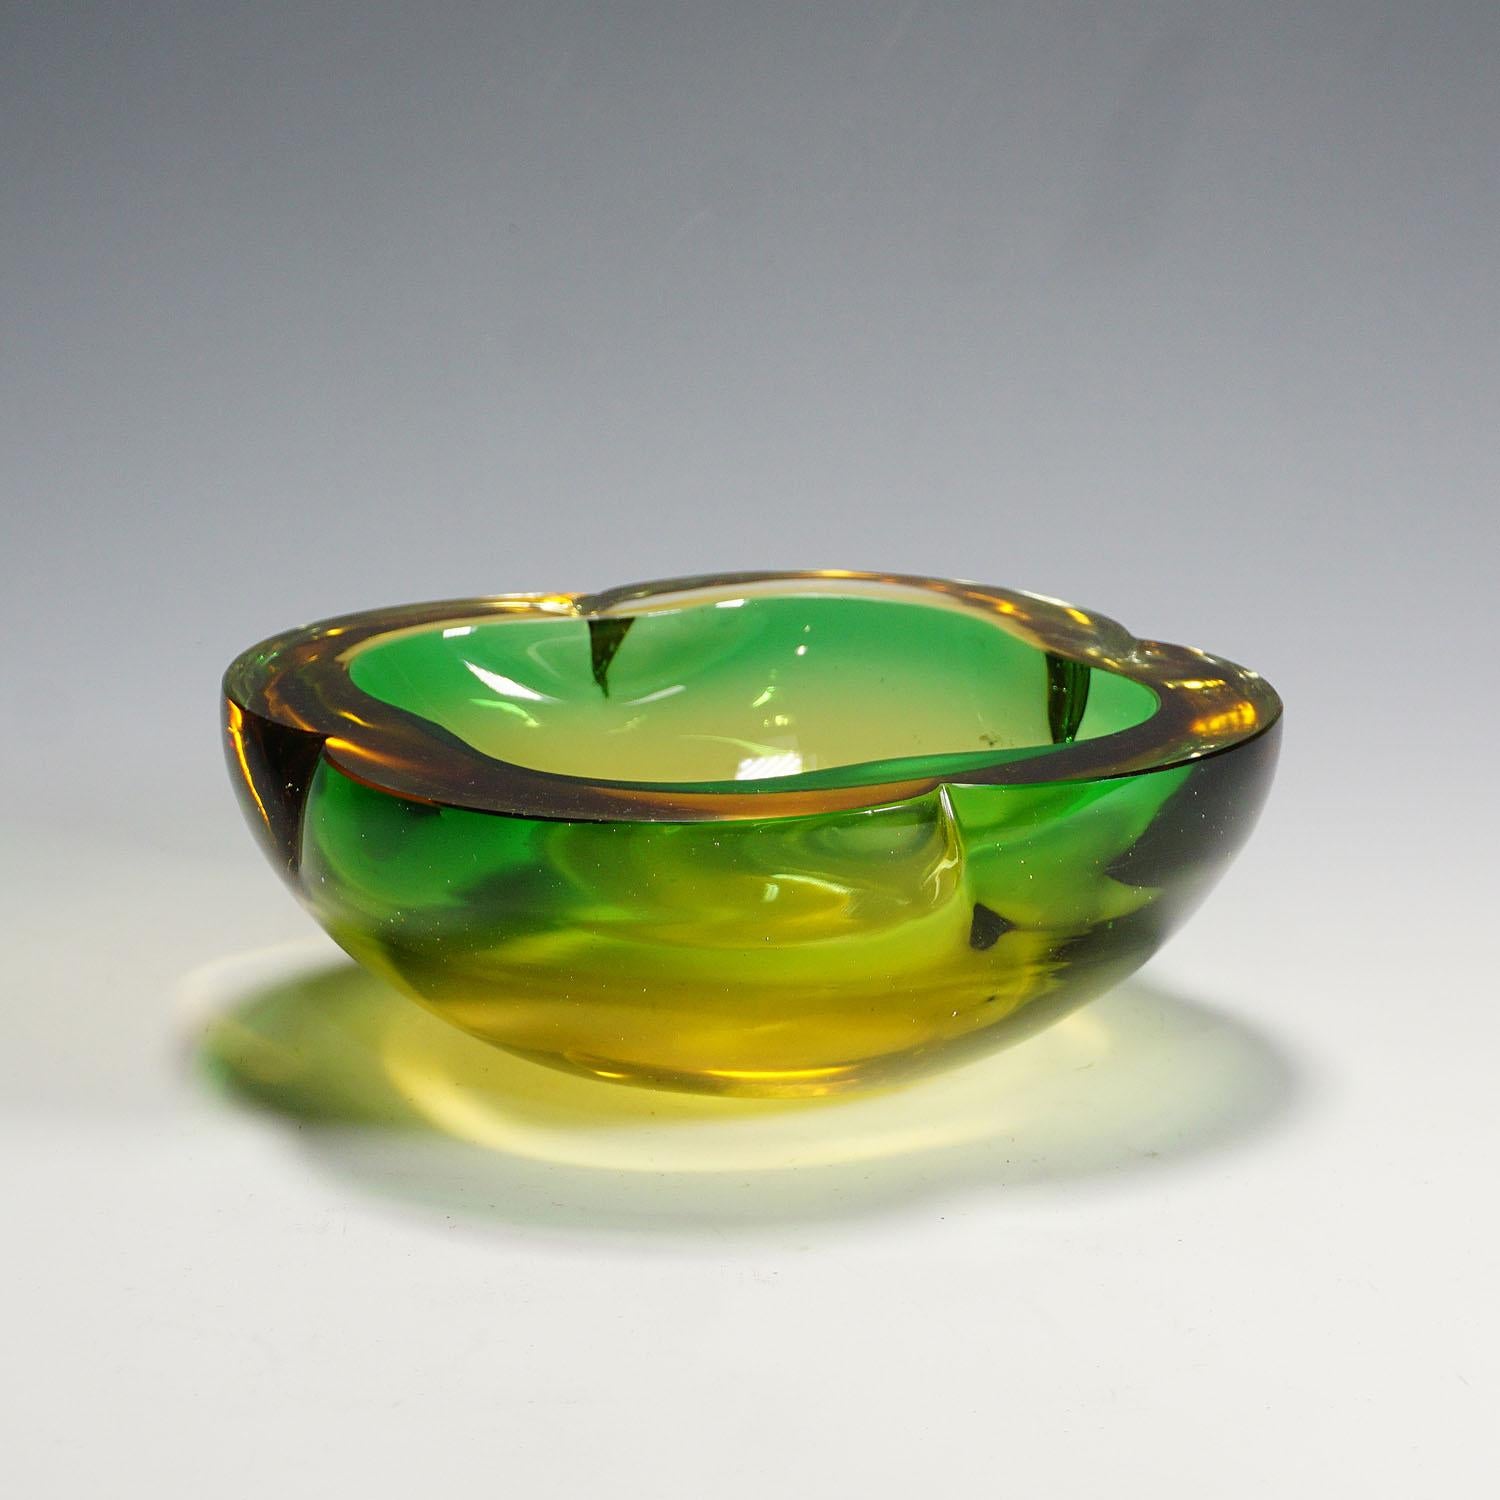 A heavy Murano sommerso glass bowl most probably manufactured by Seguso Vetri d'Arte circa 1950s. Manufactured in green glass with a thick amber glass overlay. A classical design of the 60s which highlights every table or desk.

Measures:
Width: